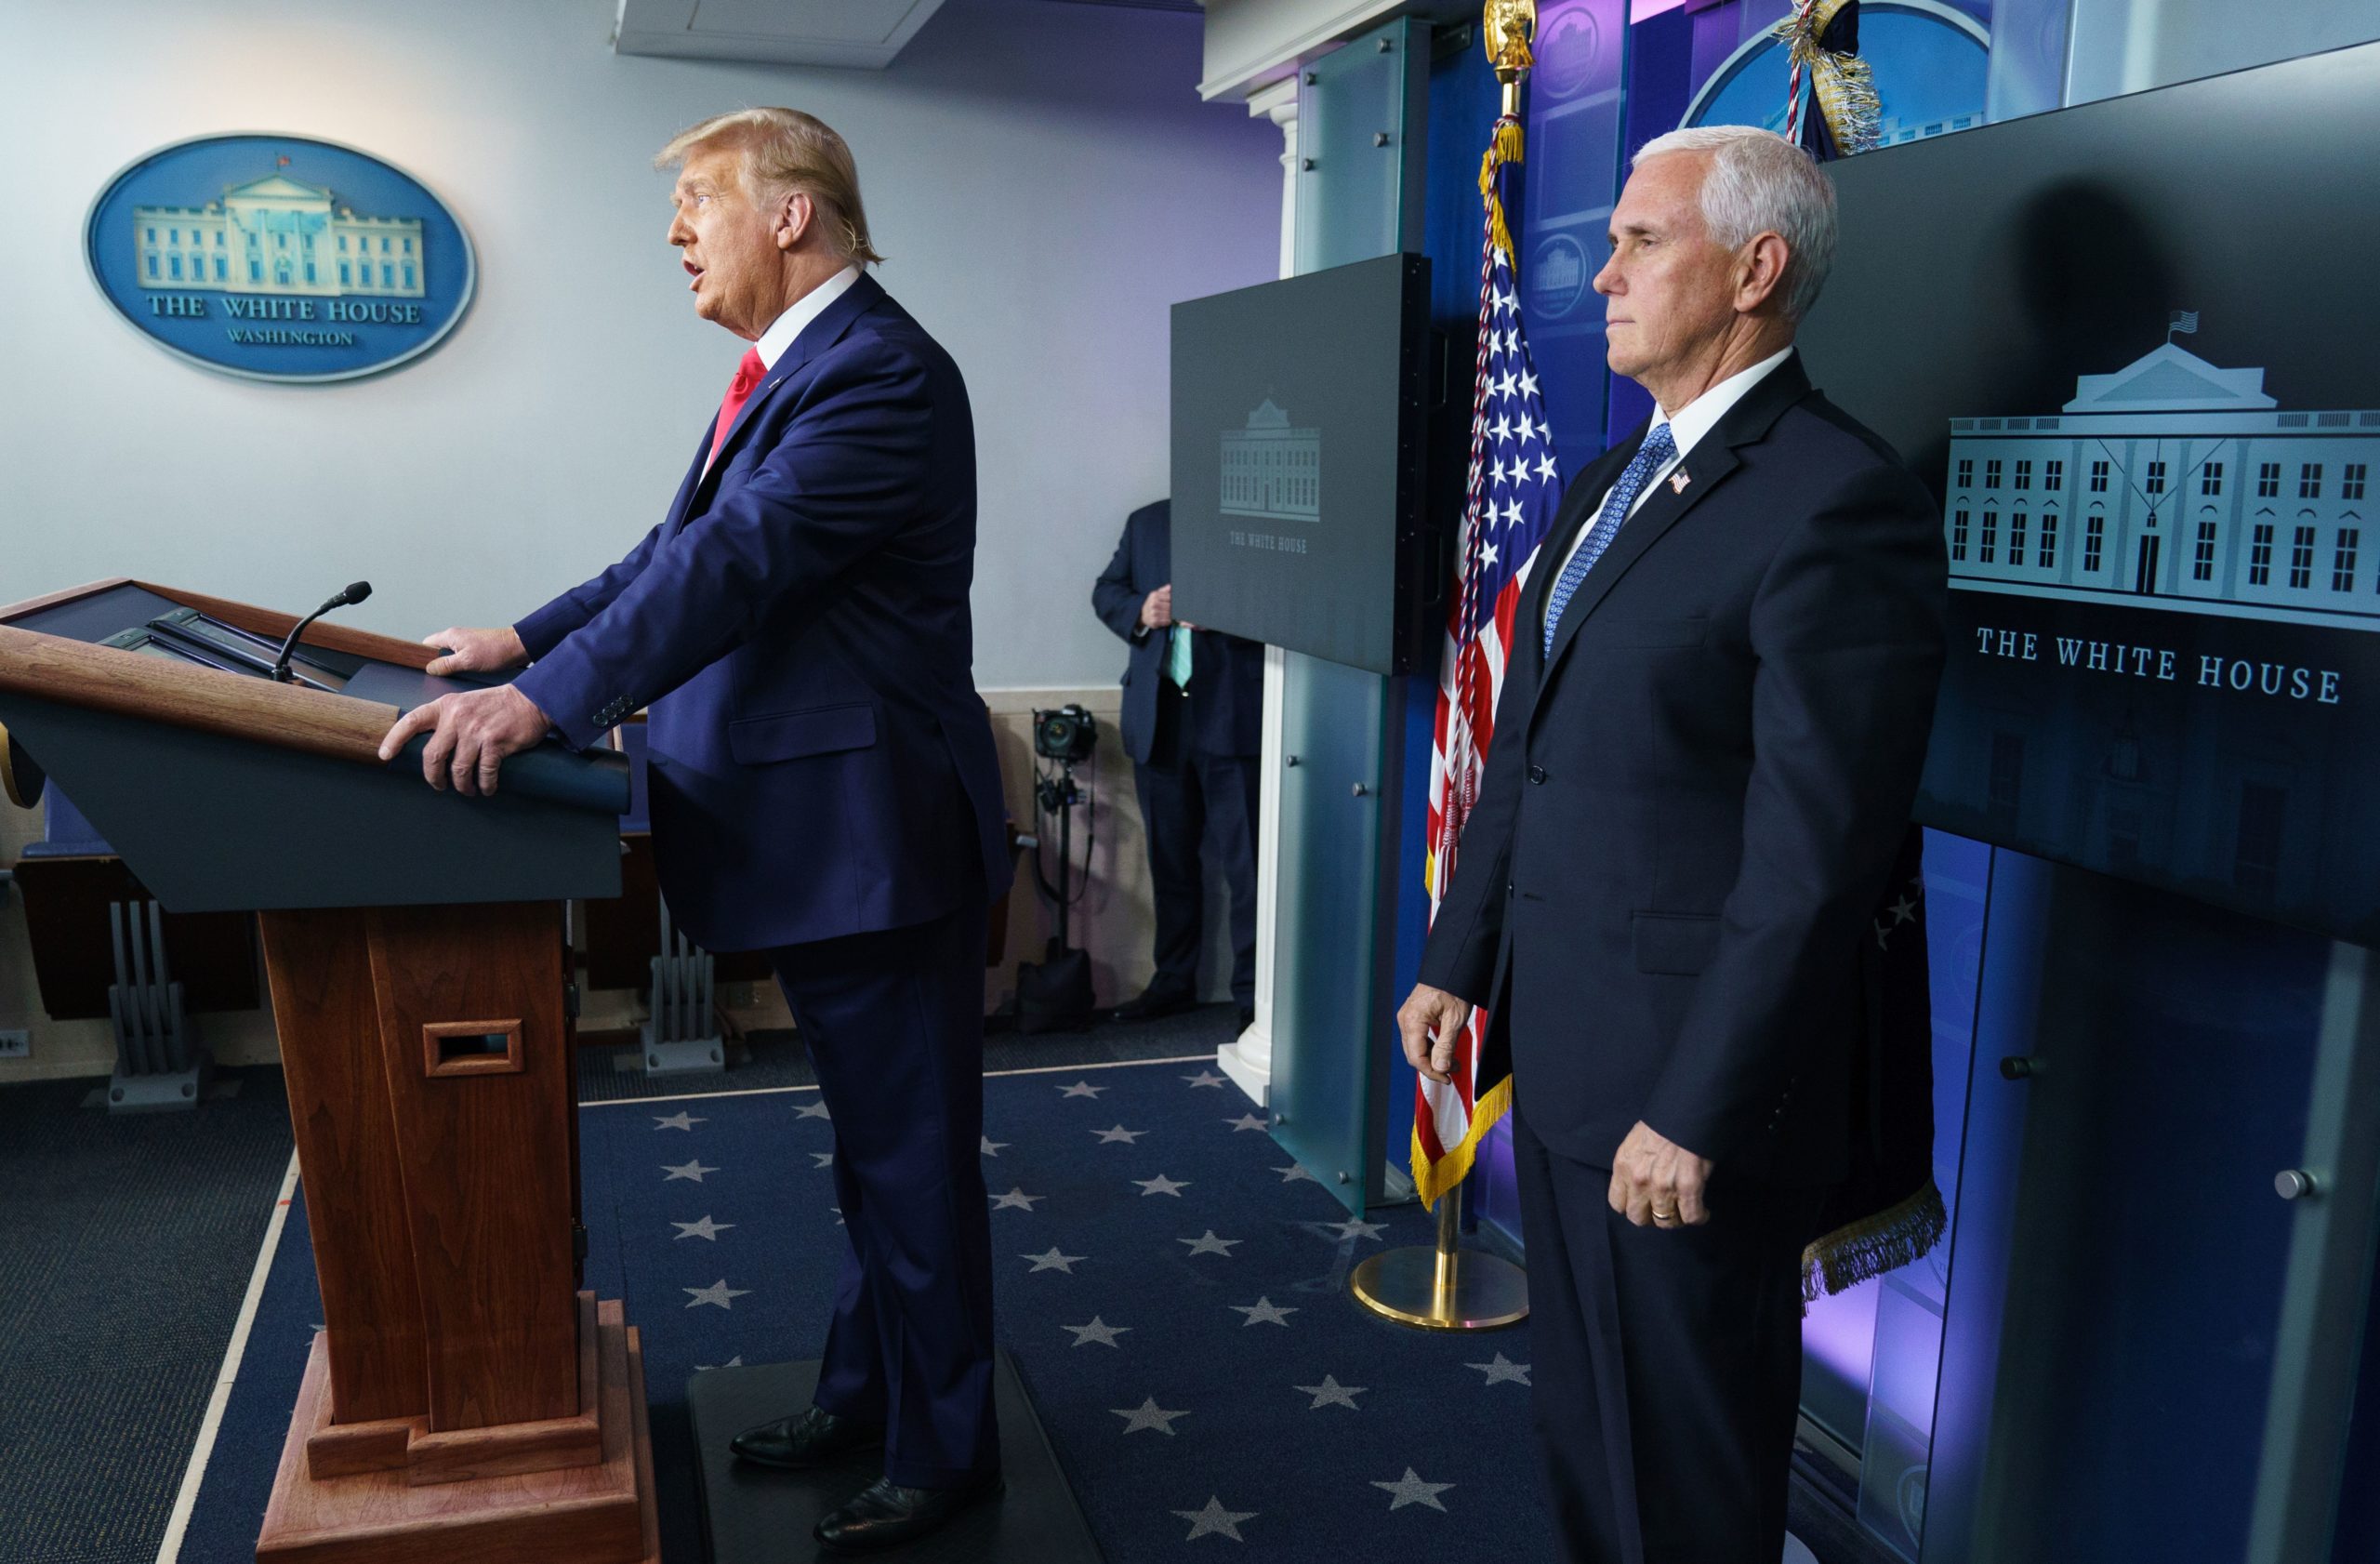 US President Donald Trump with Vice President Mike Pence (R), delivers remarks on the stock market during an unscheduled appearance in the Brady Briefing Room of the White House in Washington, DC on November 24, 2020. (Photo by MANDEL NGAN/AFP via Getty Images)